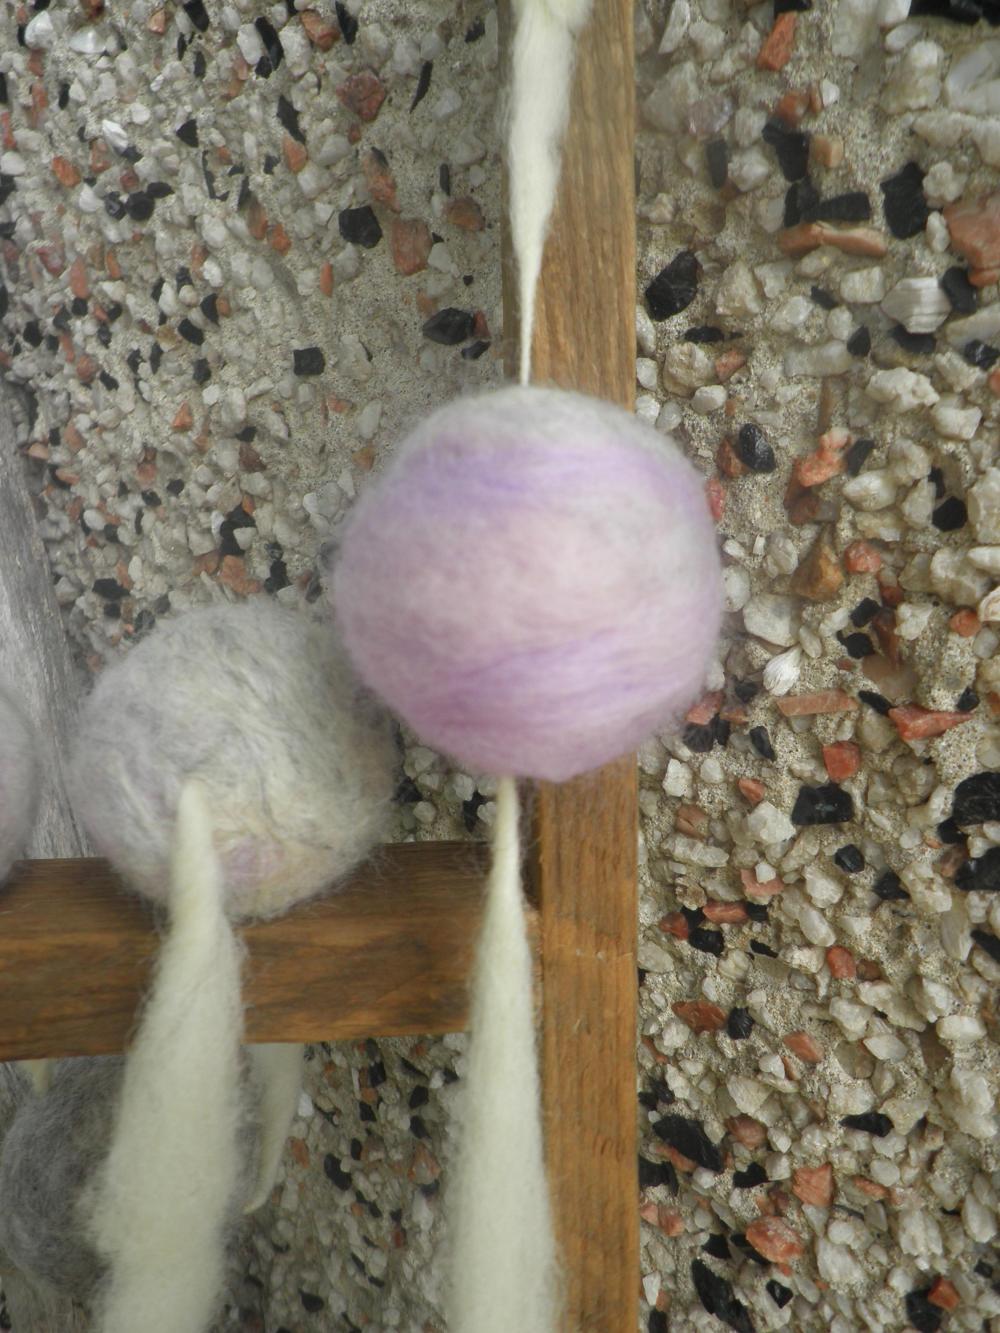 Wool Ball Garland, Unique Home Decor, Eco-friendly, Rustic And Natural Design. Ooak, Shelf And Table Decor.